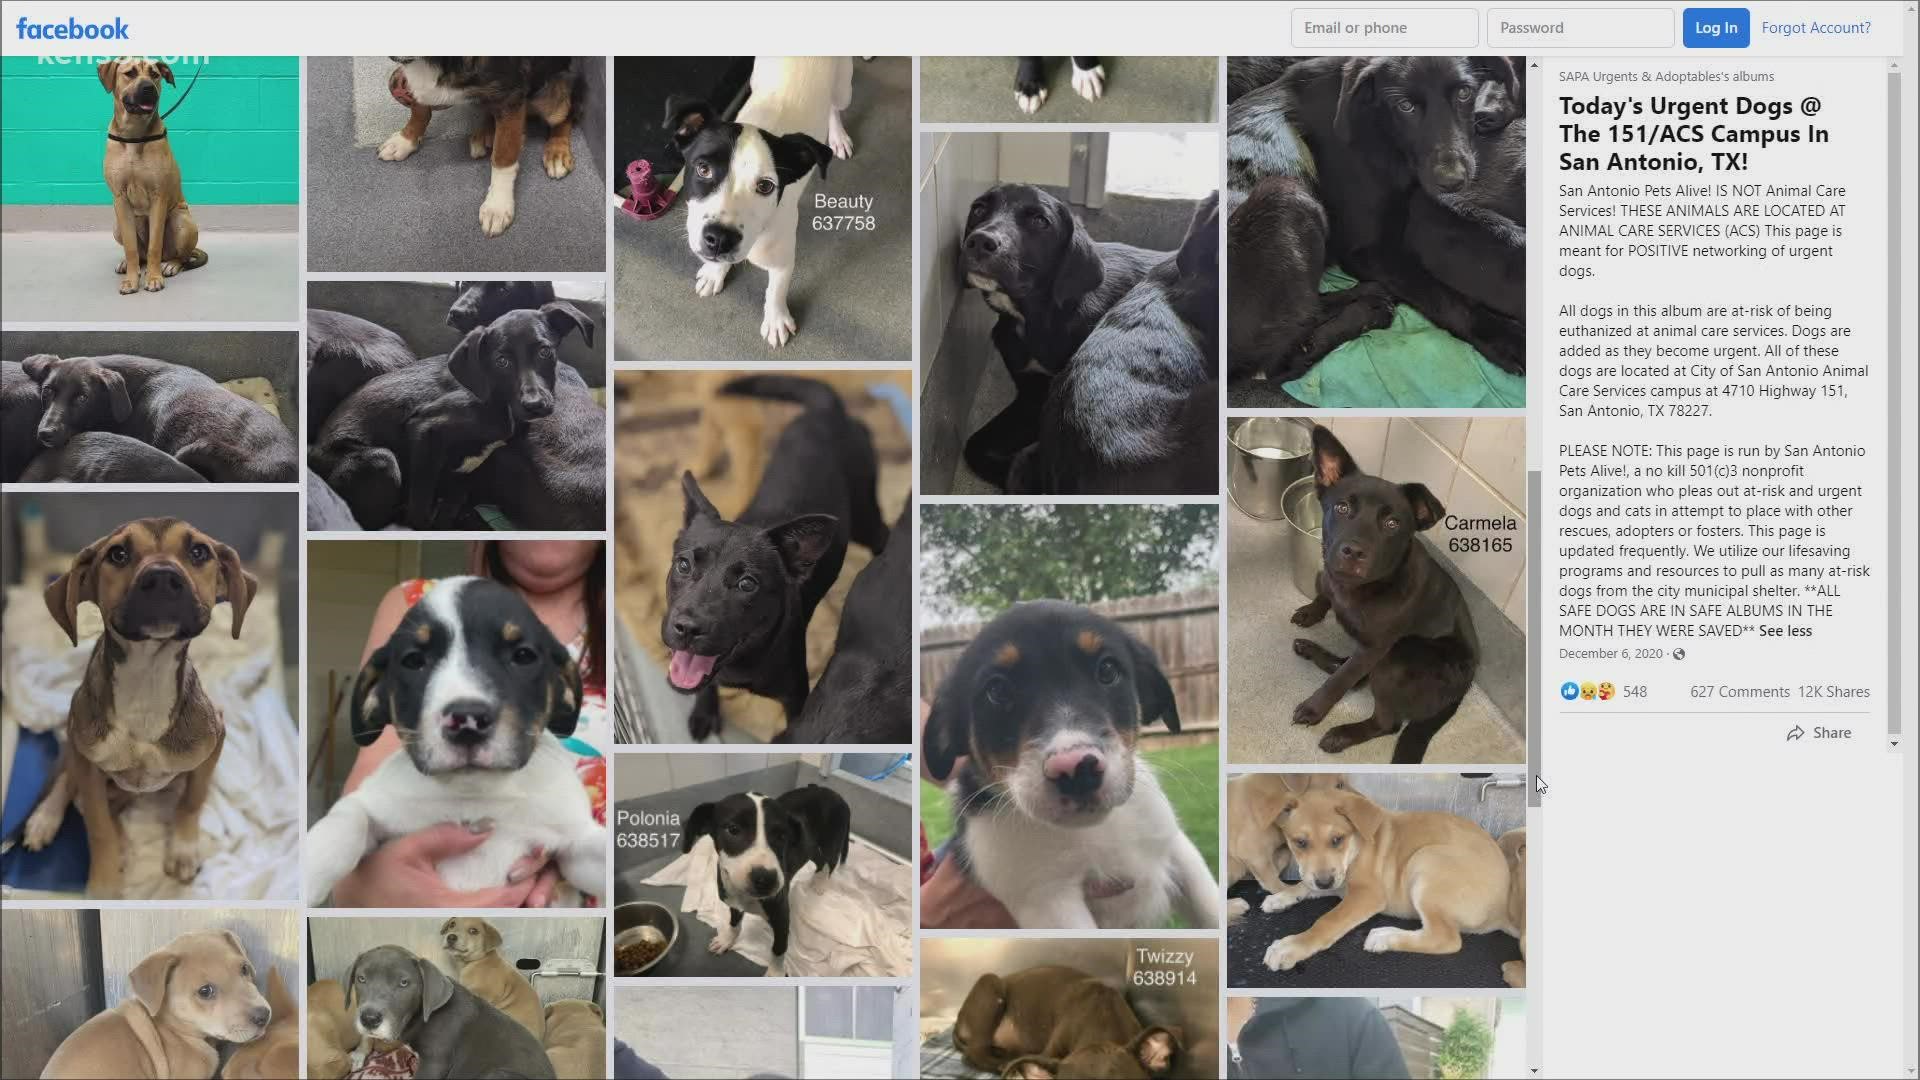 "This year has been unprecedented for the amount of puppies and mom and pups we are seeing."